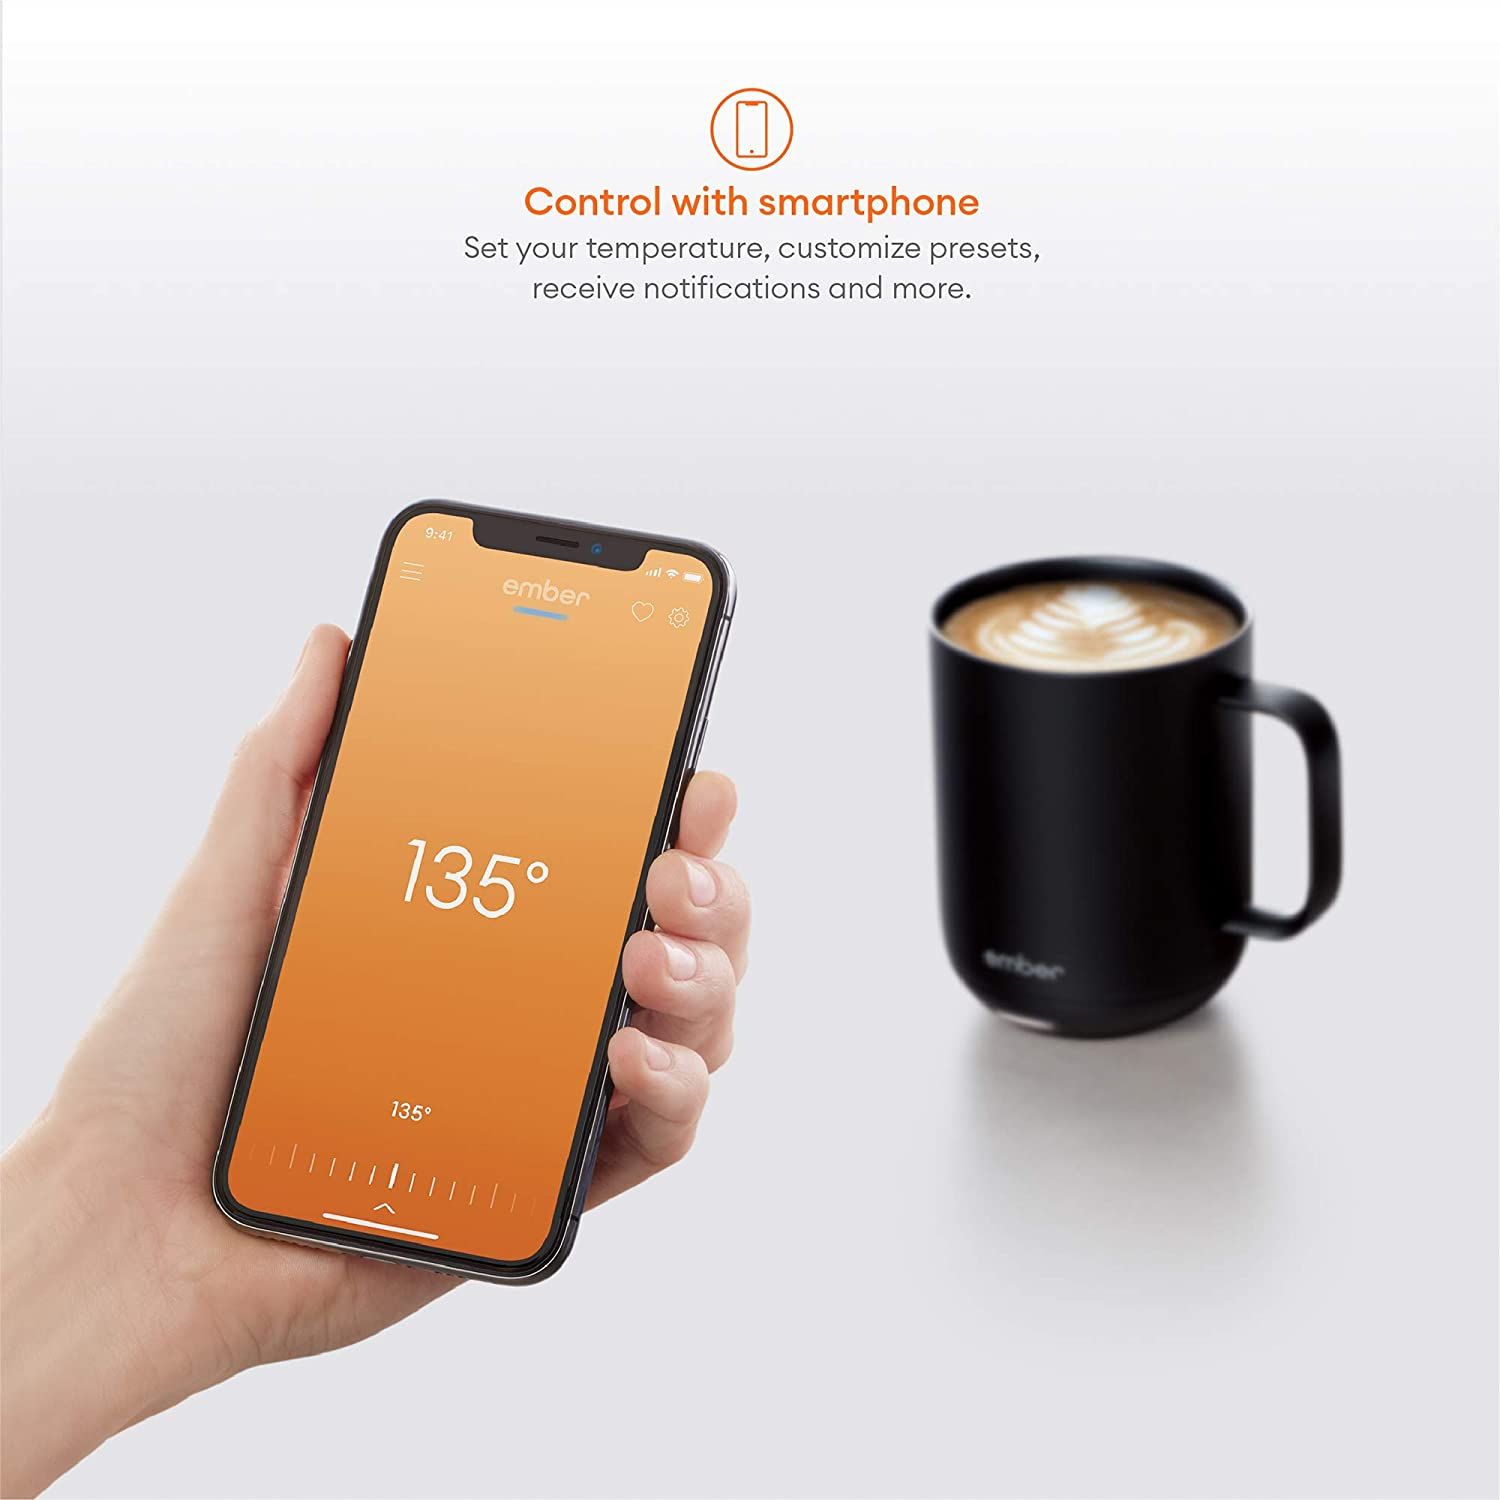 A visual for the Ember Smart Mug connected with smartphone app